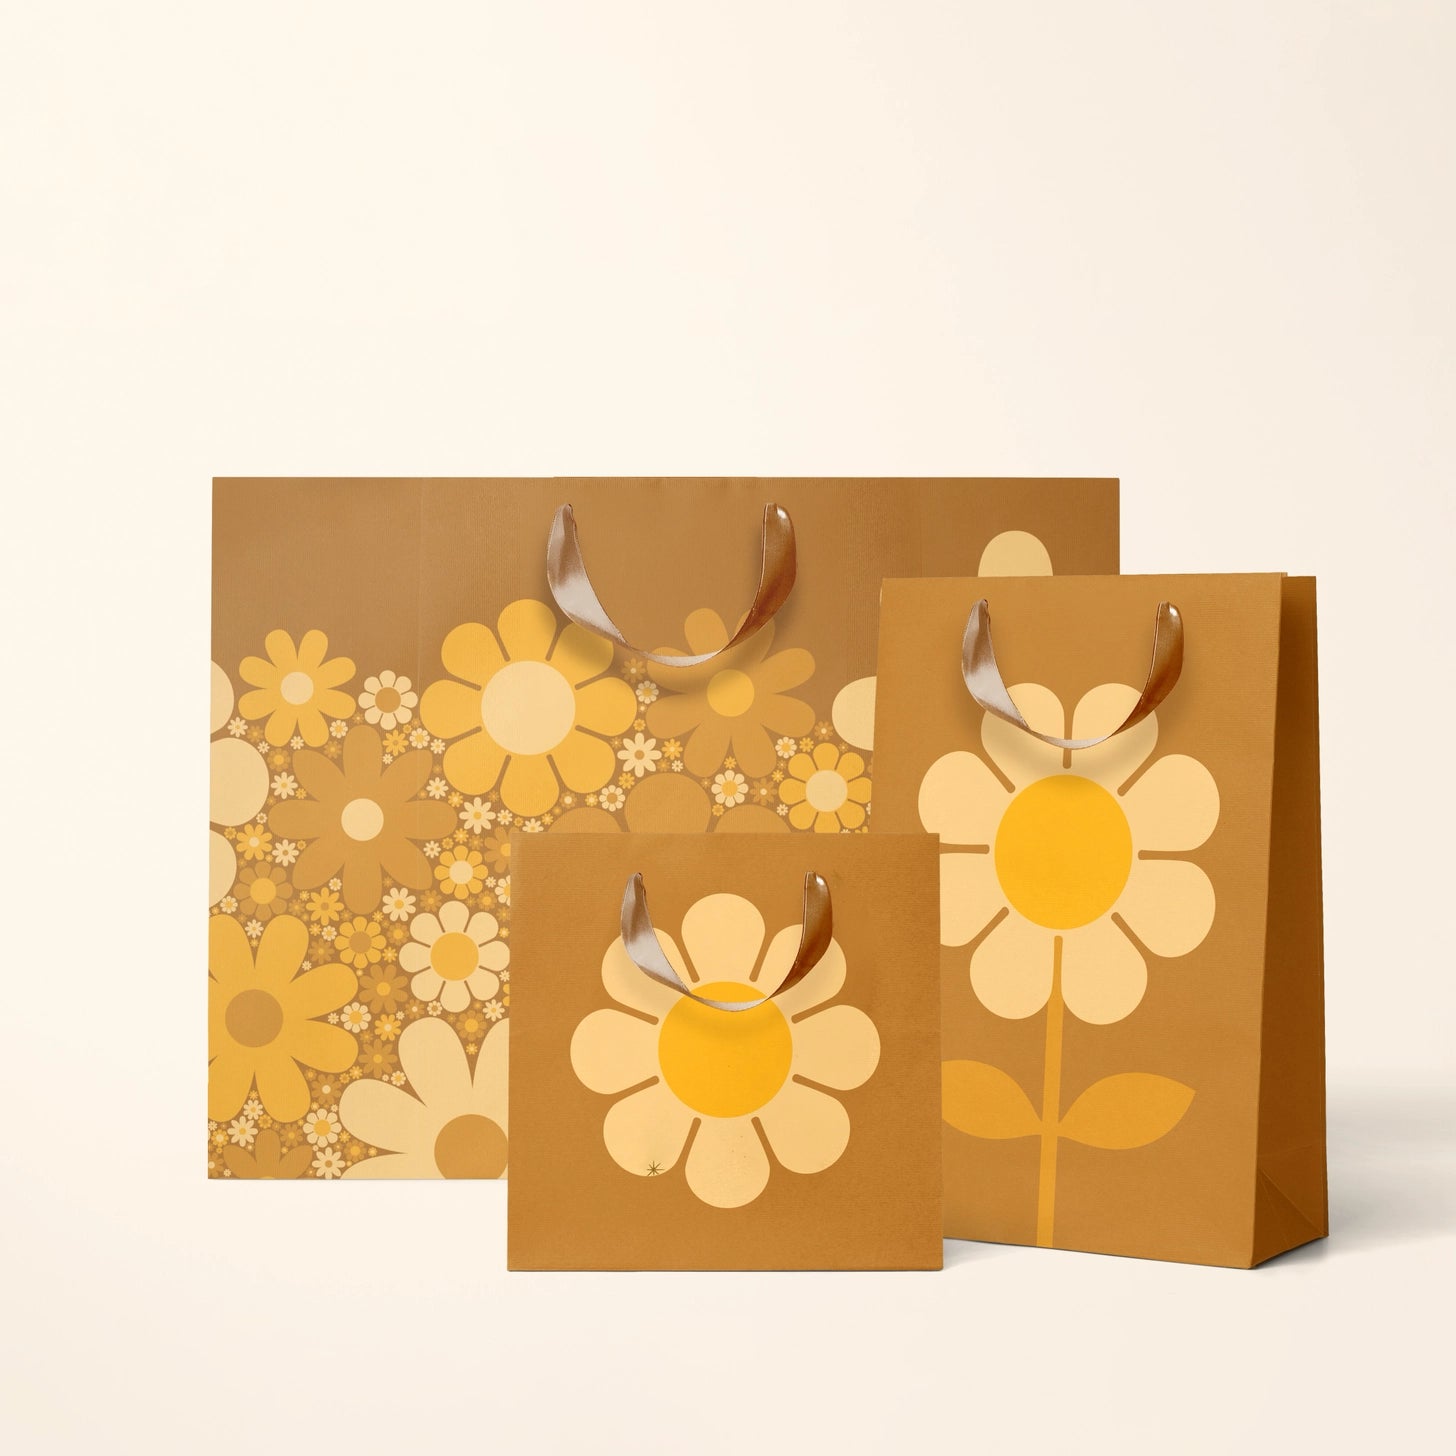 On an ivory background is three brown gift bags with yellow daisies on them. 